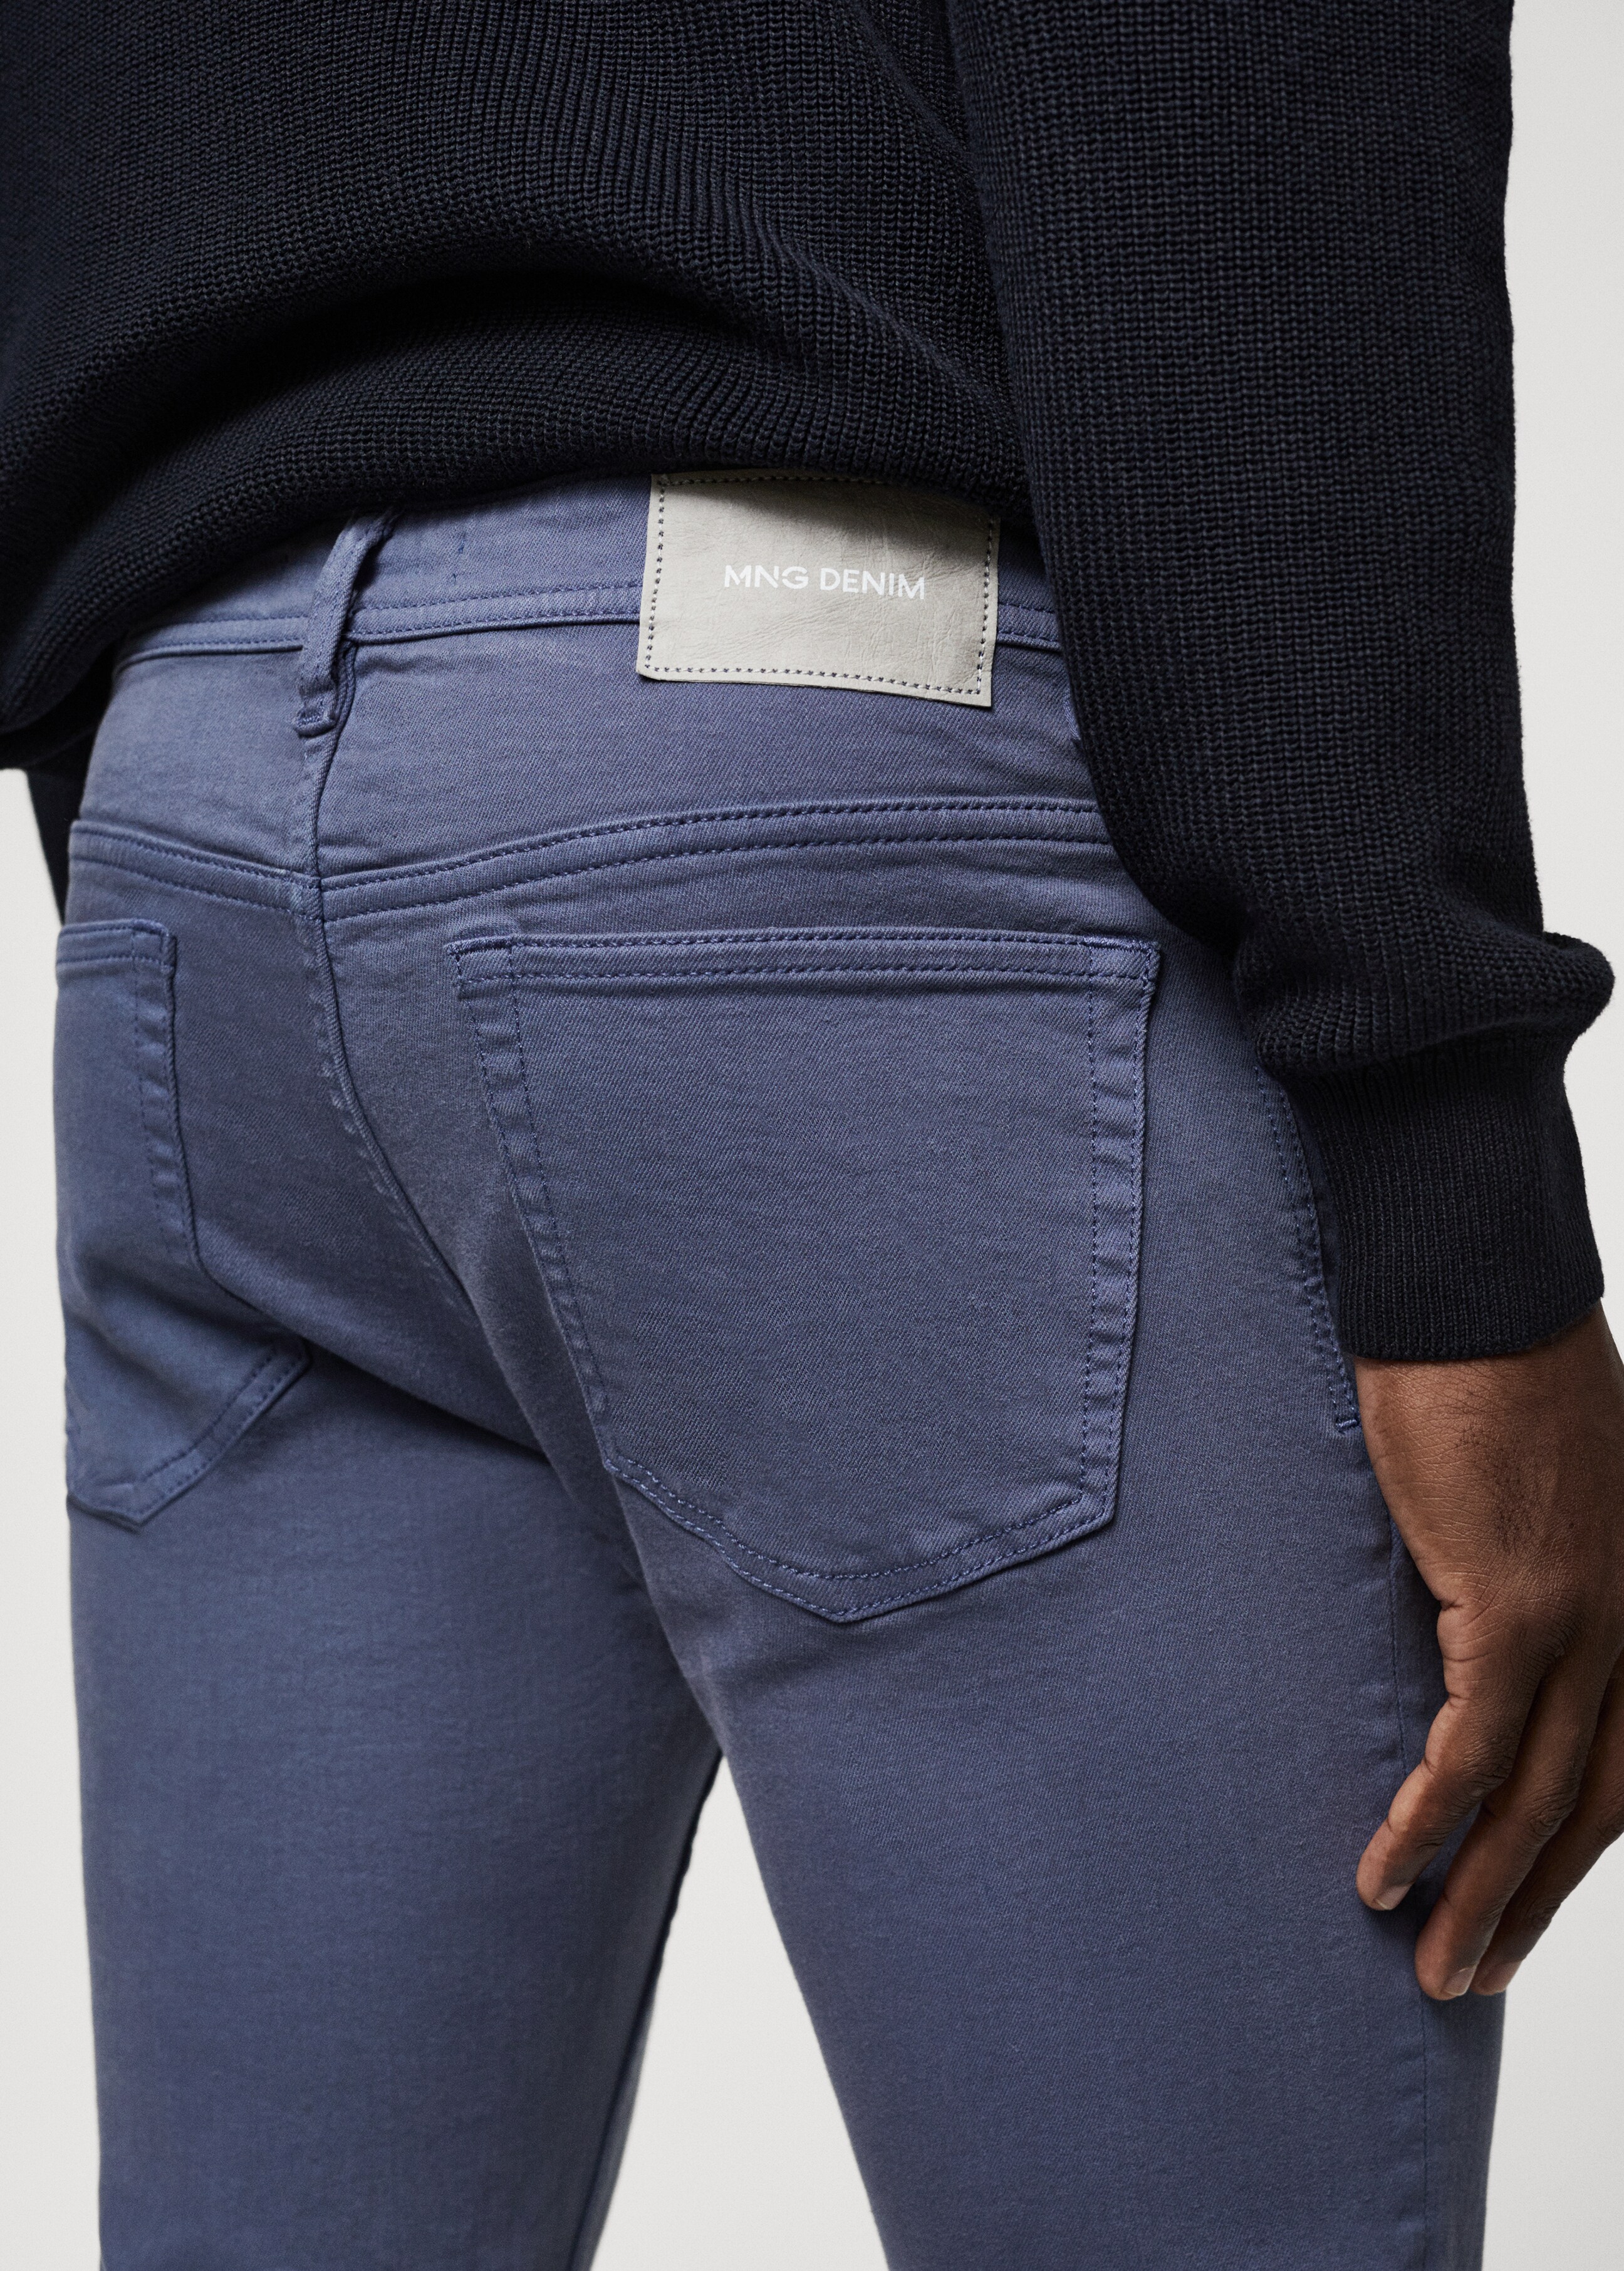 Colour skinny jeans - Details of the article 4